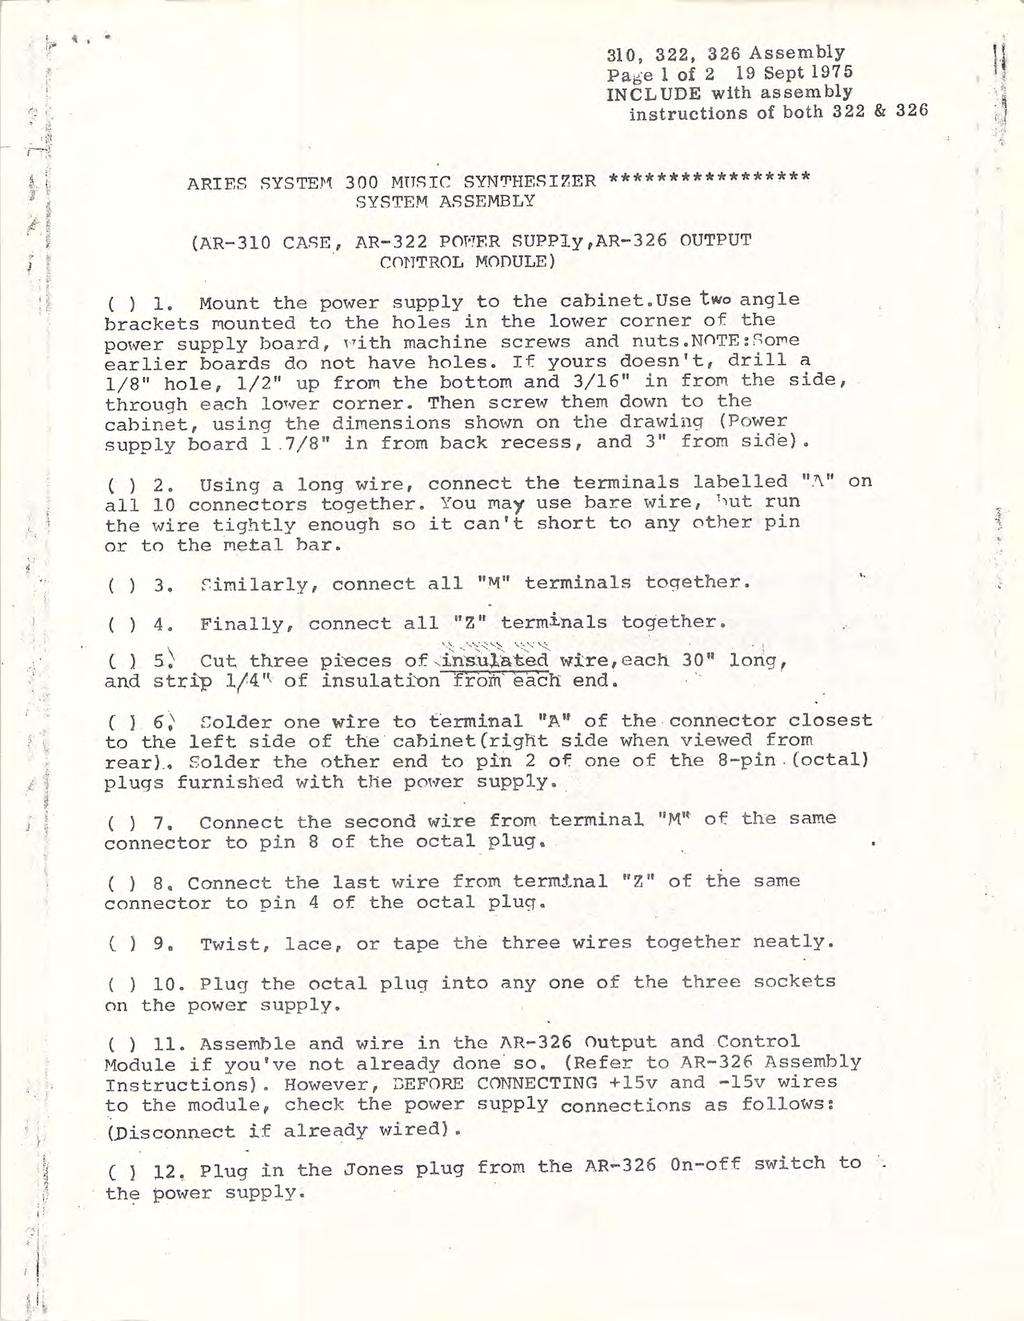 y «i ; 310, 3, 36 Assembly Page 1 of 19 Sept 1975 INCLUDE with assembly instructions of both 3 & 36 I 1 A R I E S S Y S T E M 3 0 0 M U S I C S Y N T H E S I Z E R * * * * * * * * * * * * * * * * * *